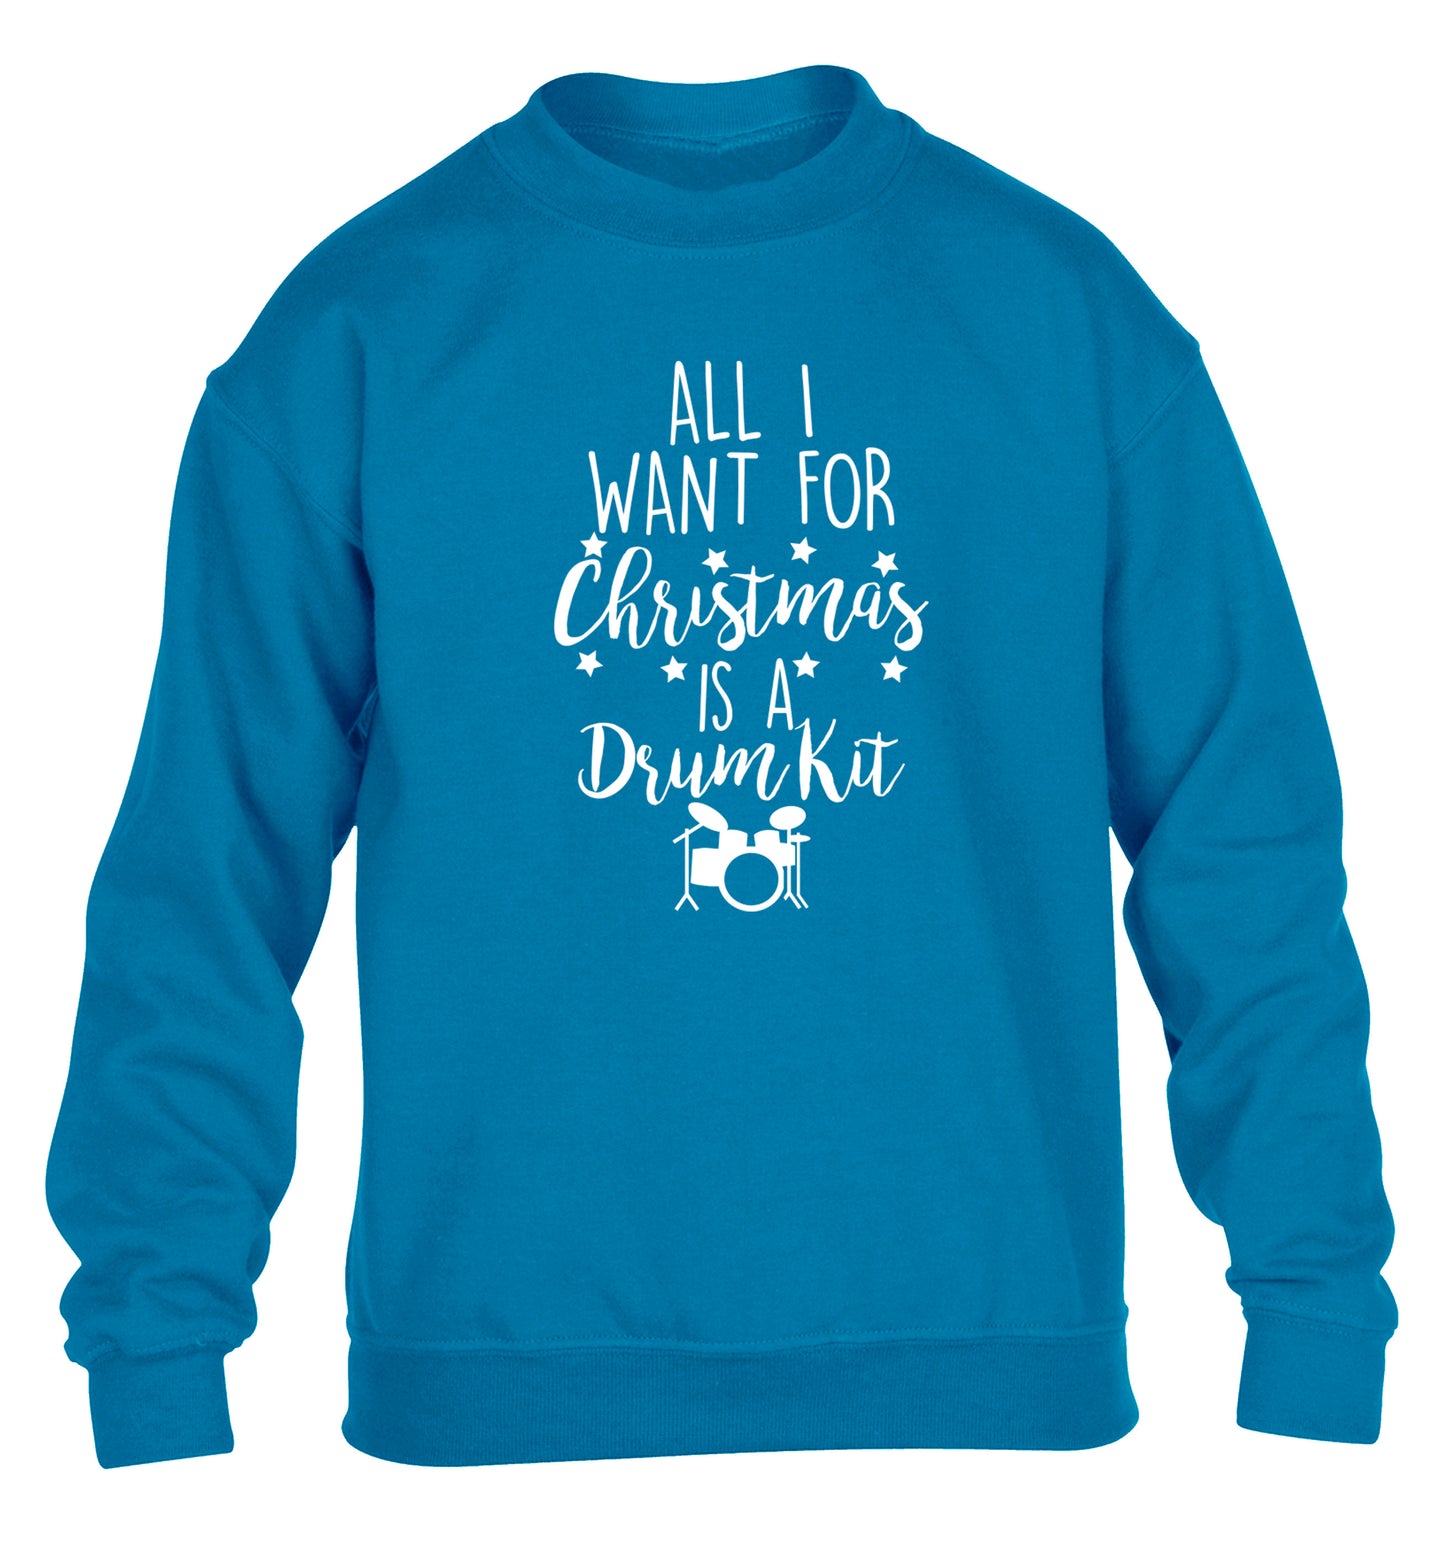 All I want for Christmas is a drum kit! children's blue sweater 12-14 Years